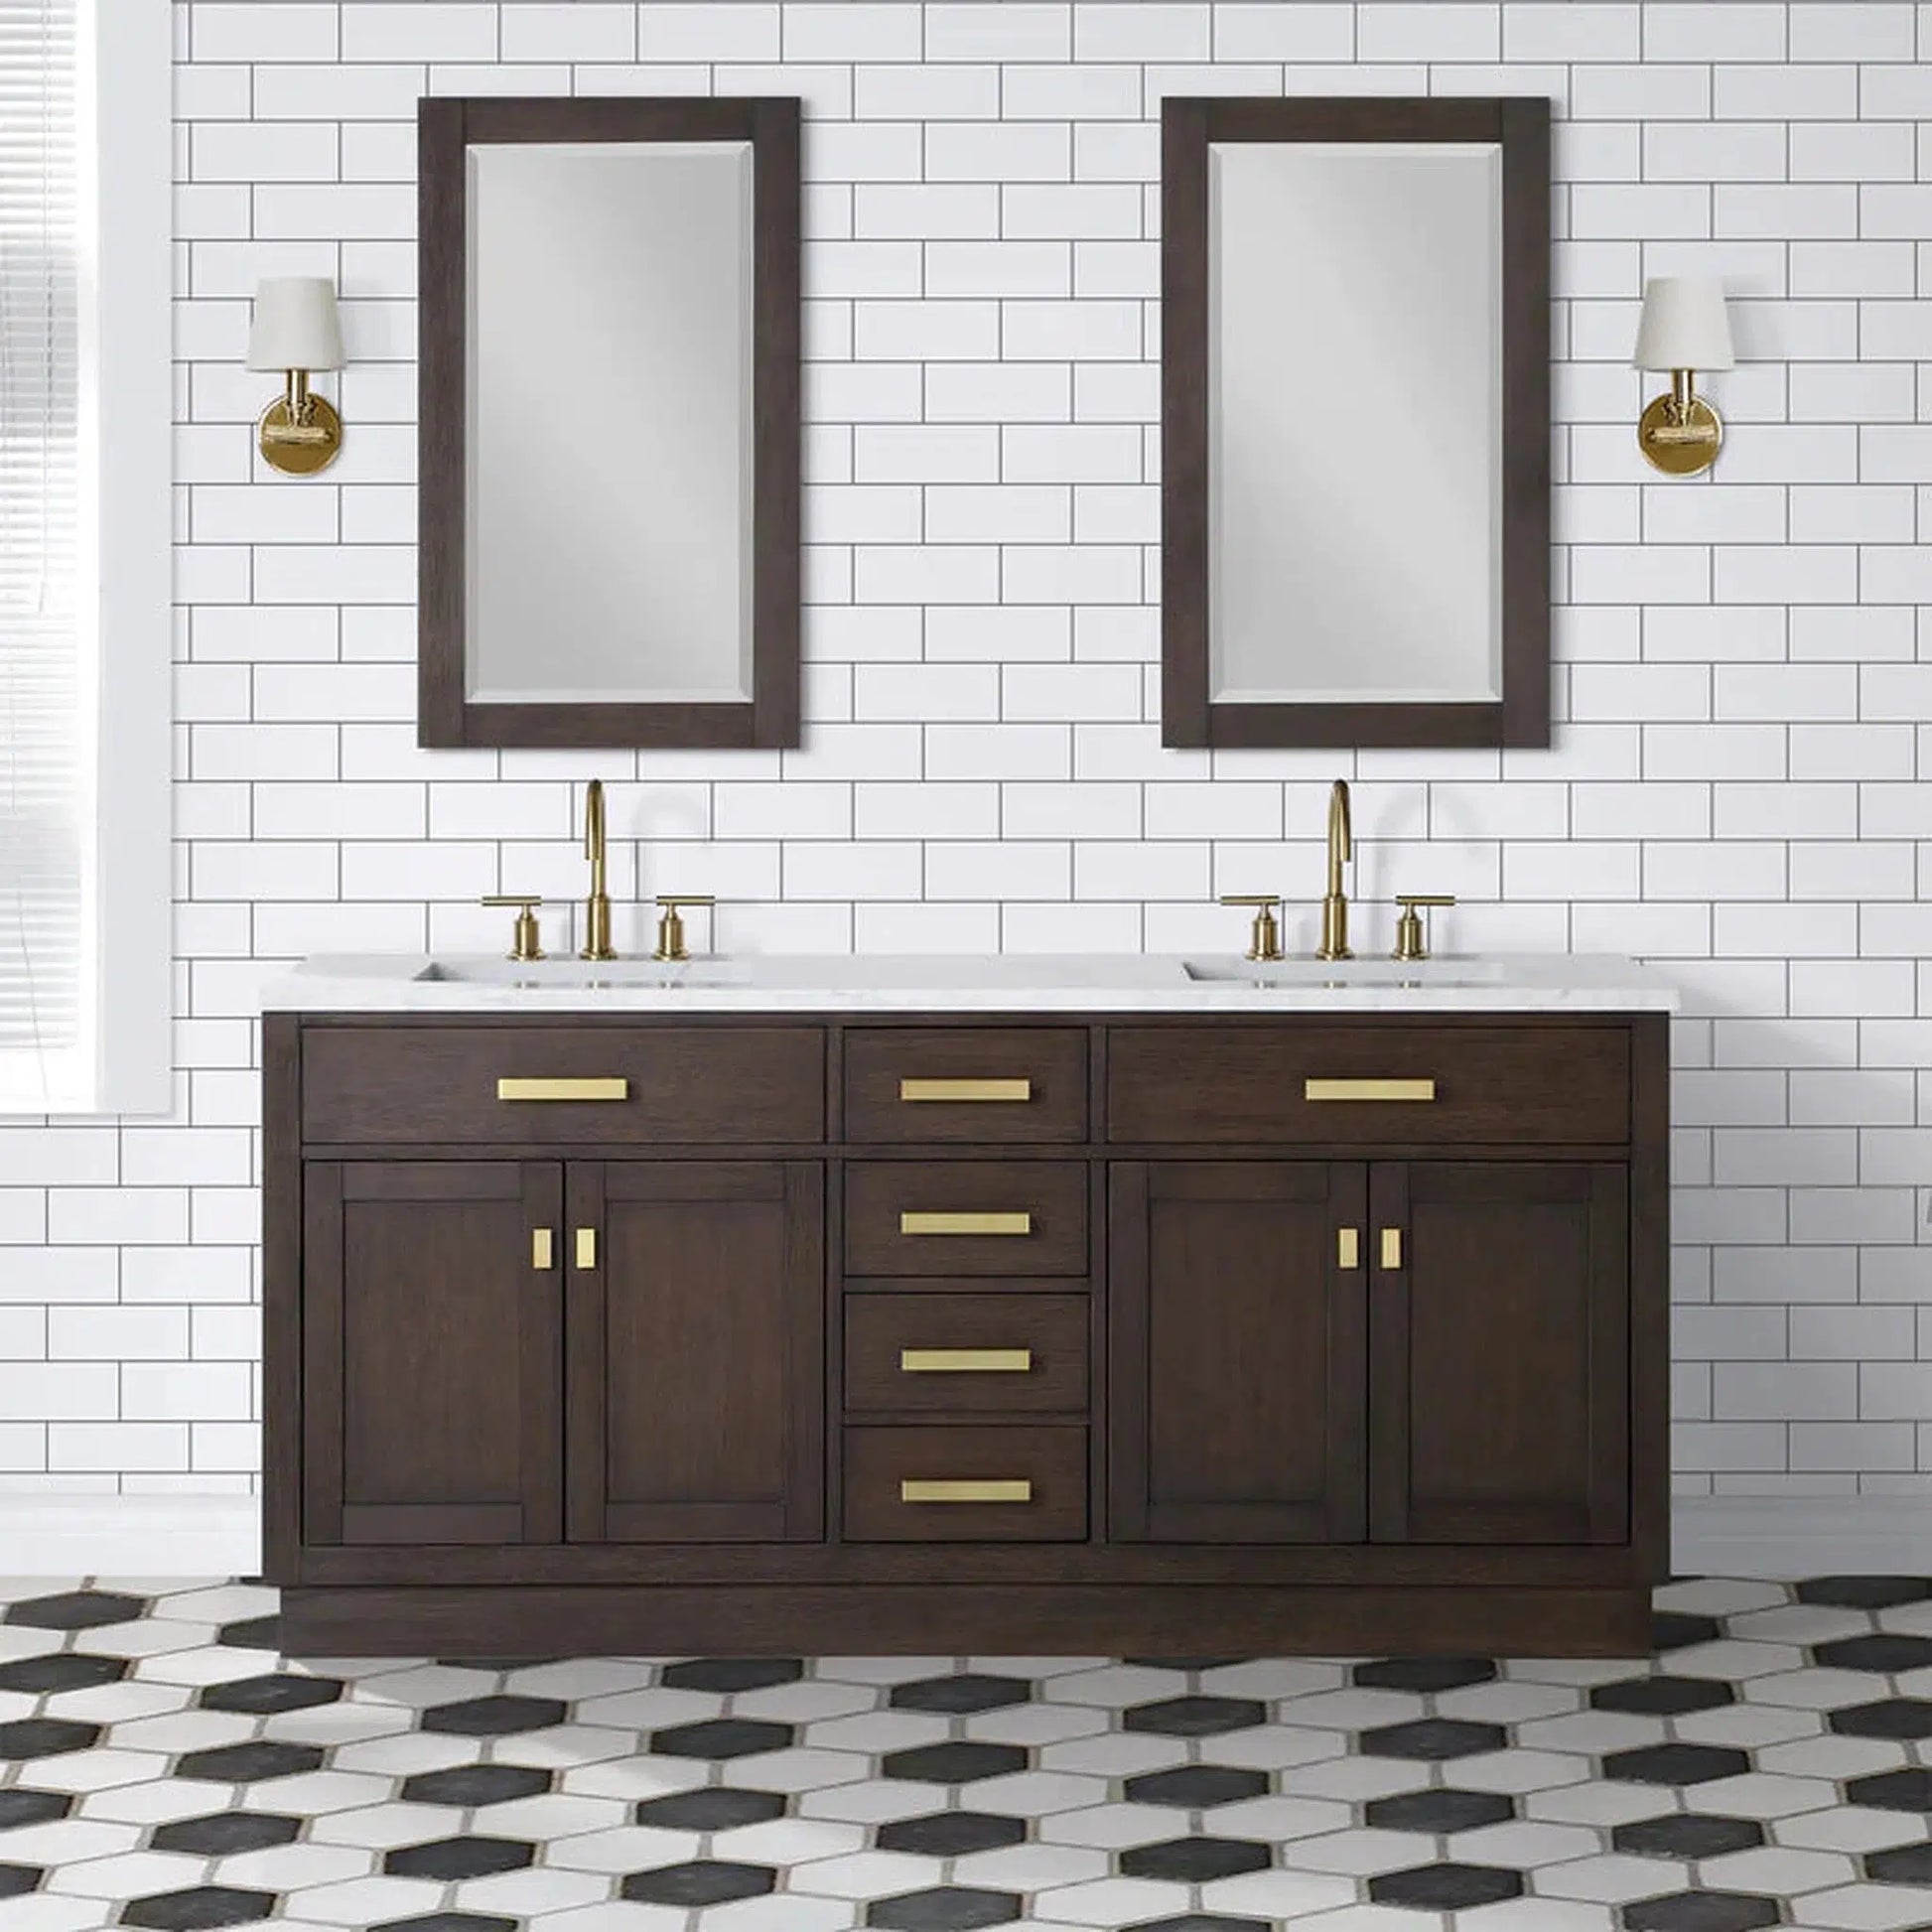 Water Creation Chestnut 72" Double Sink Carrara White Marble Countertop Vanity In Brown Oak with Grooseneck Faucets and Mirrors